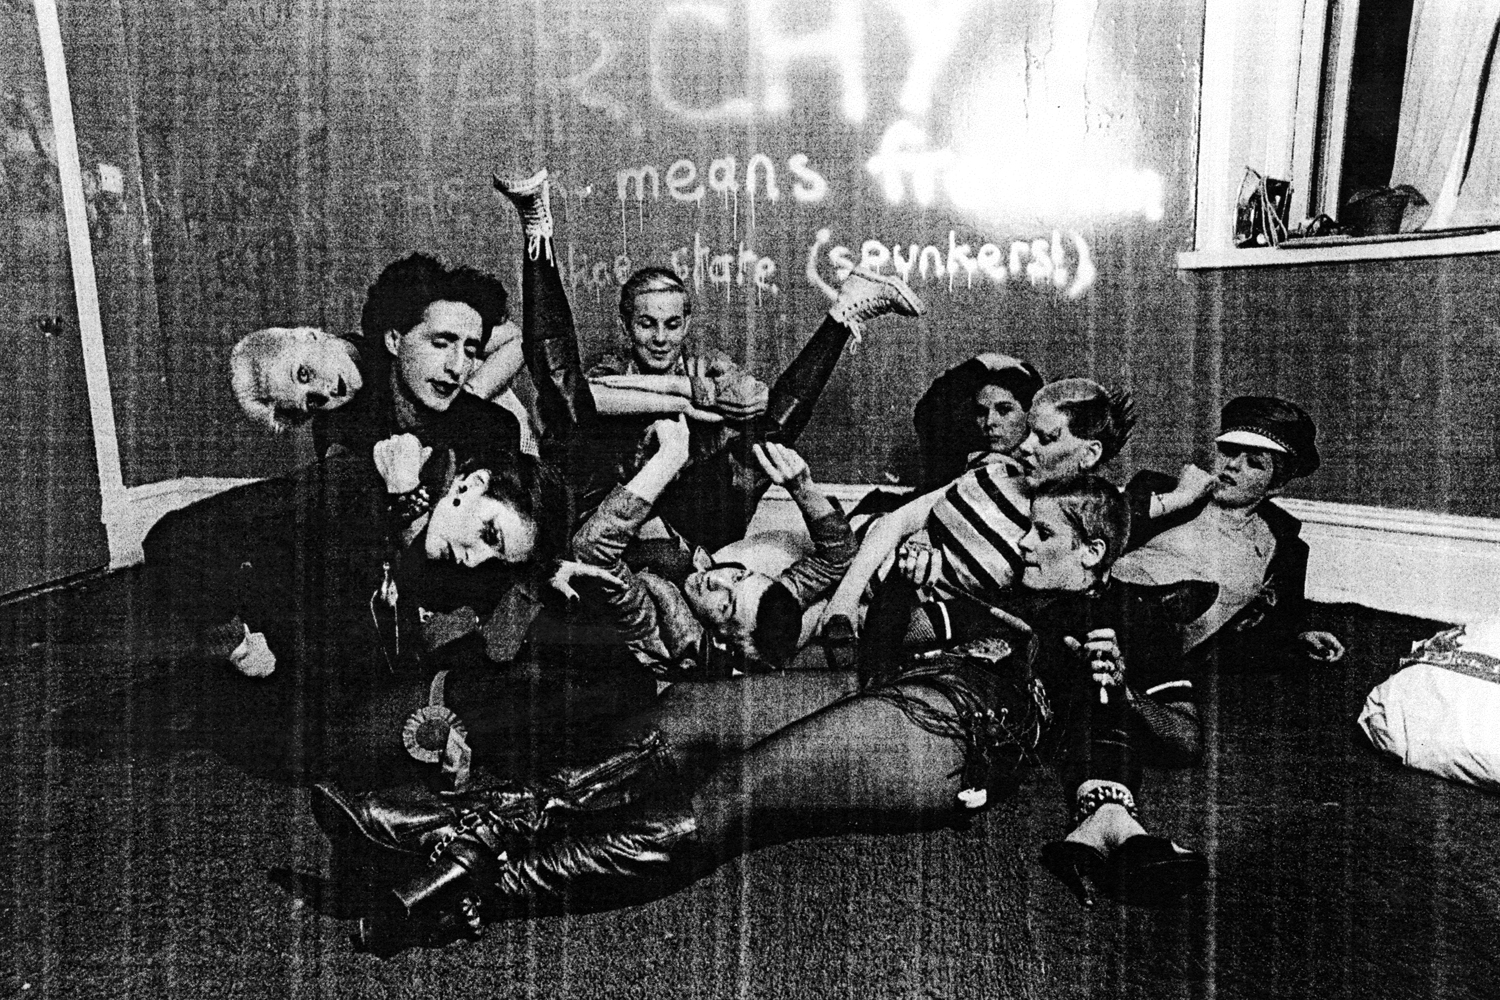 'The Bromley Contingent'—Siouxsie Sioux, Philip Salon, Debbie Juvenile, Simon Barker, Steve Severin, Berlin, Soo Severin, Sharon Hayman and Linda Ashby at Lind a Ashby's flat, London, 1976.